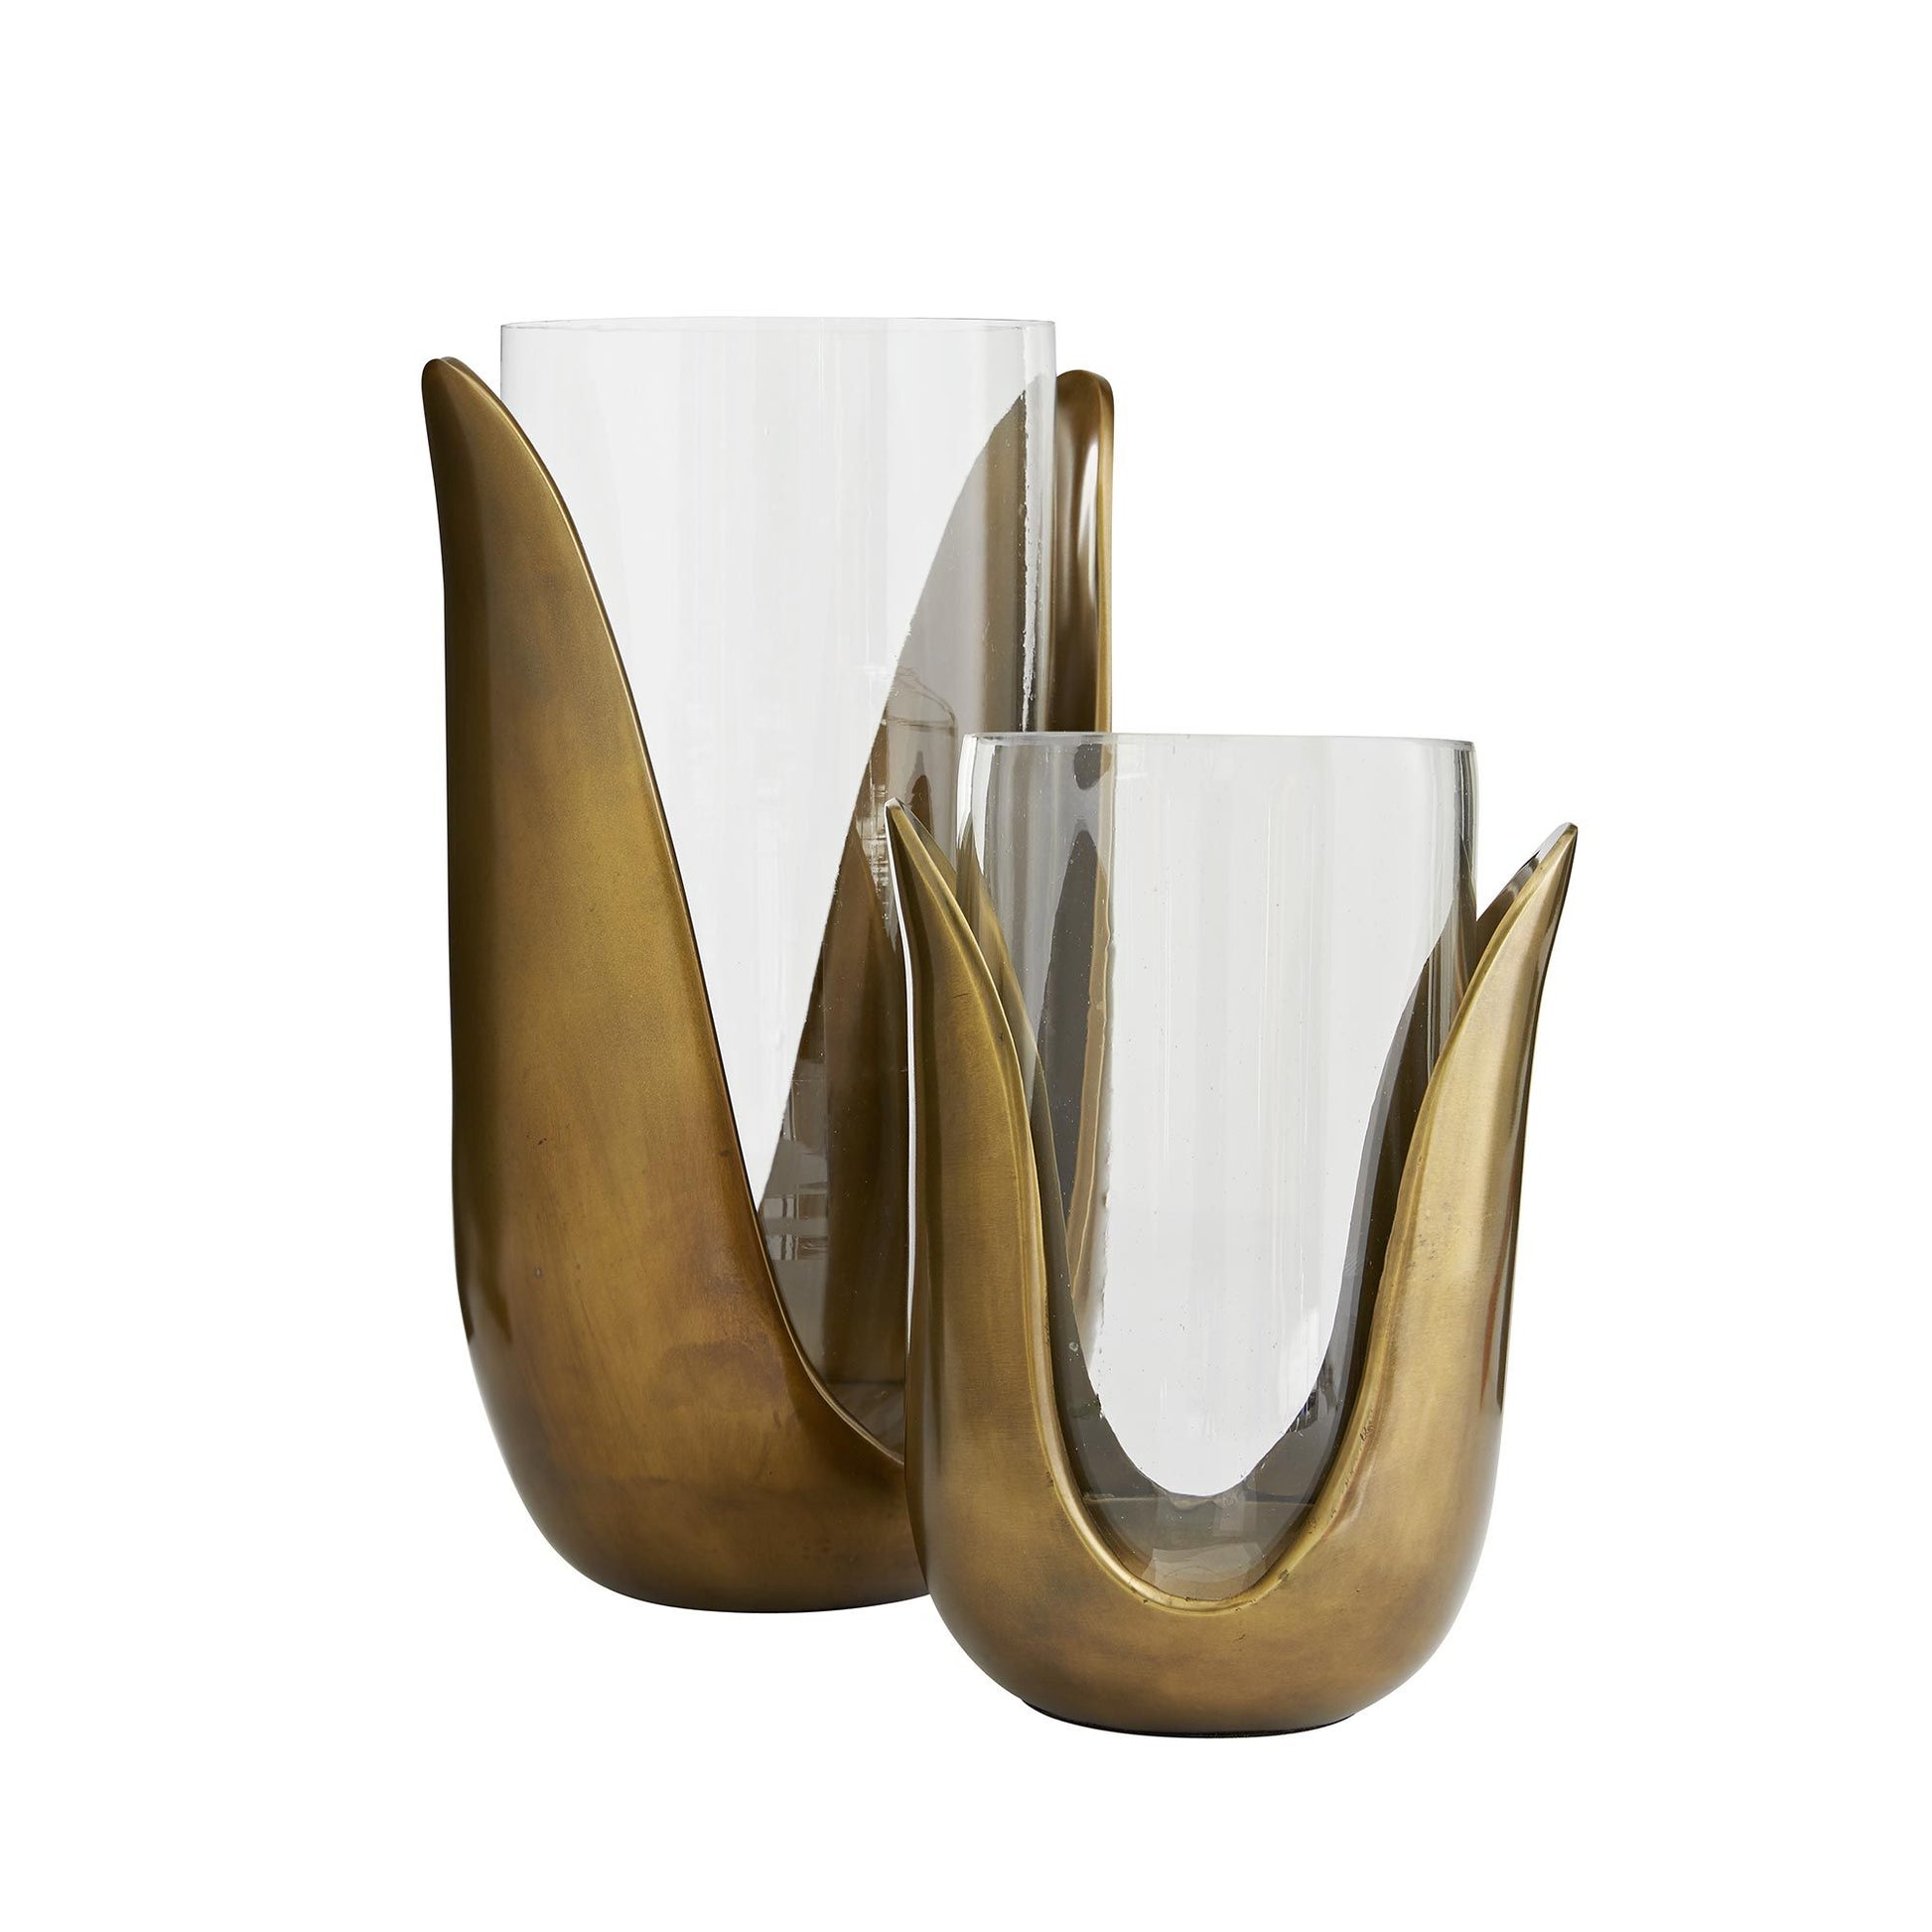 Arteriors Home Sonia Vases Set Antique Brass and Clear Glass